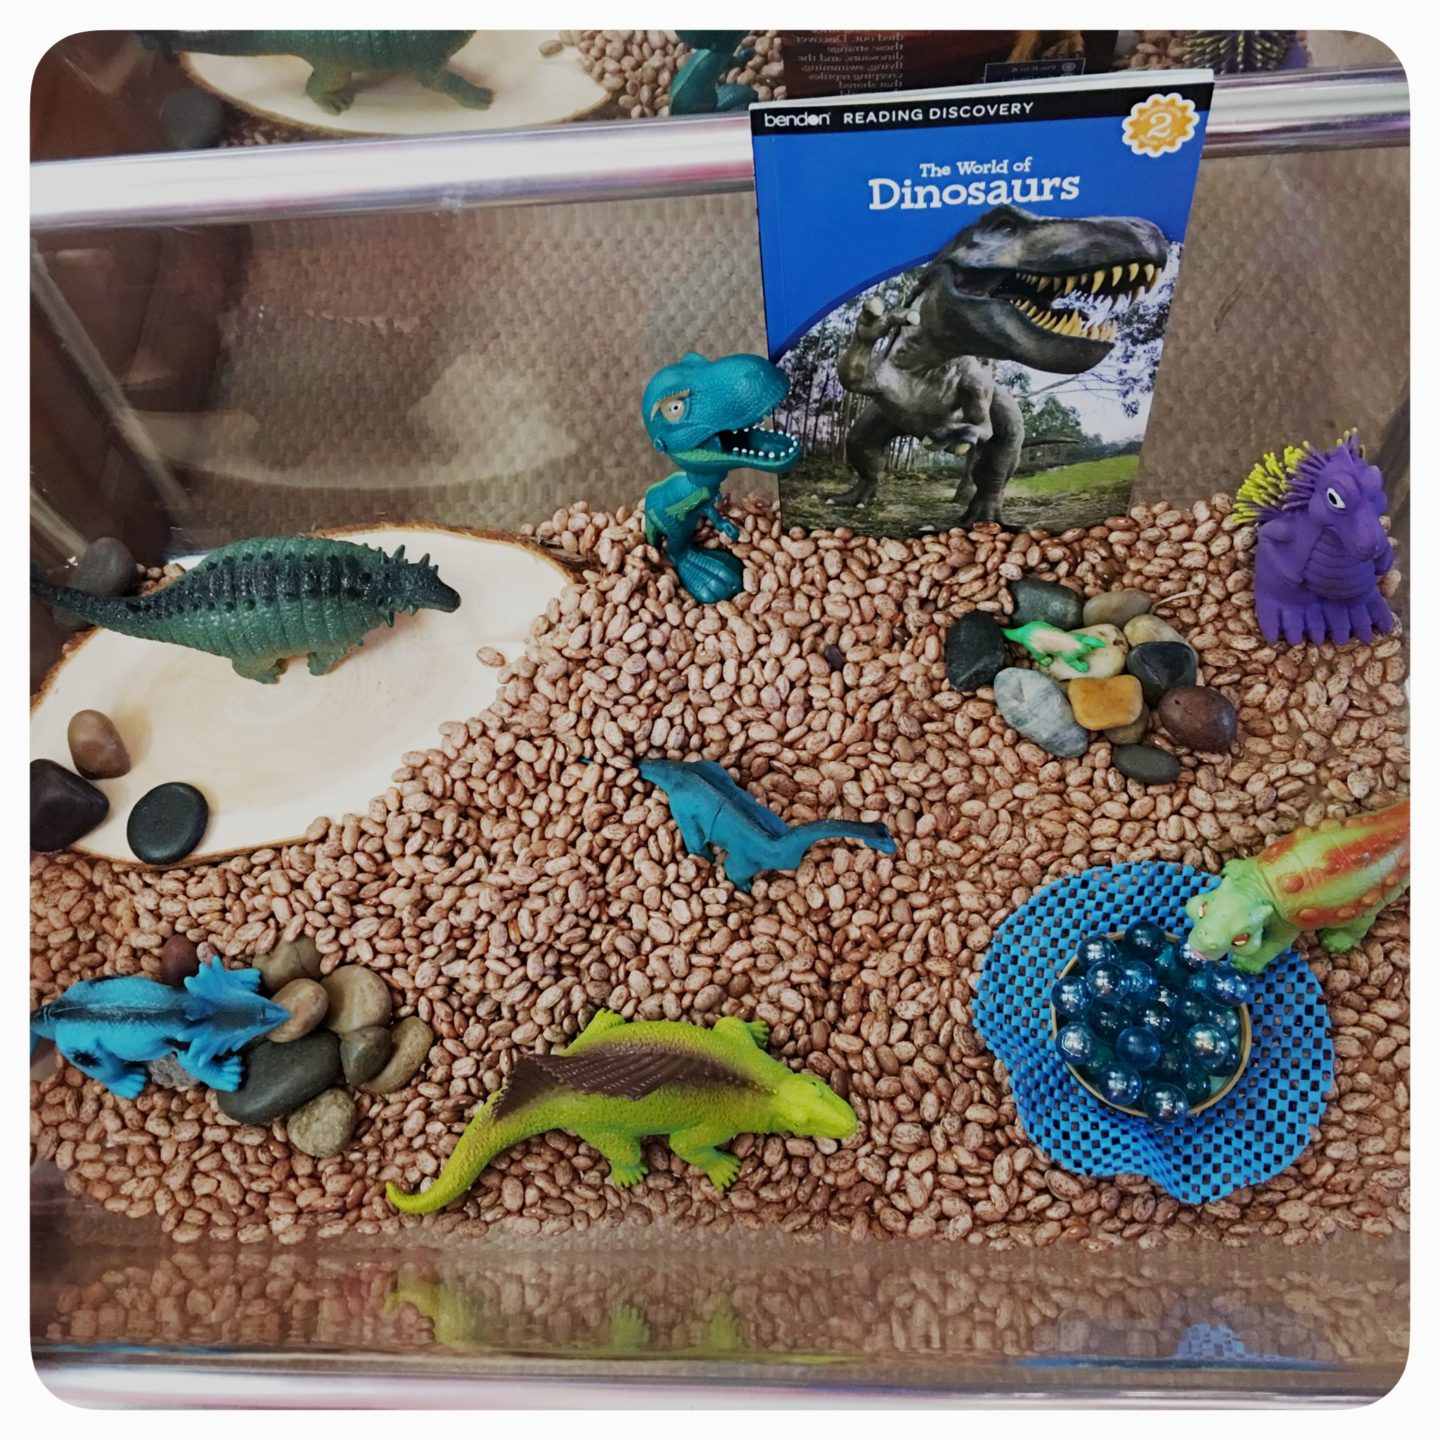 Creating simple sensory bins for exploring Dinosaurs by @How2playtoday